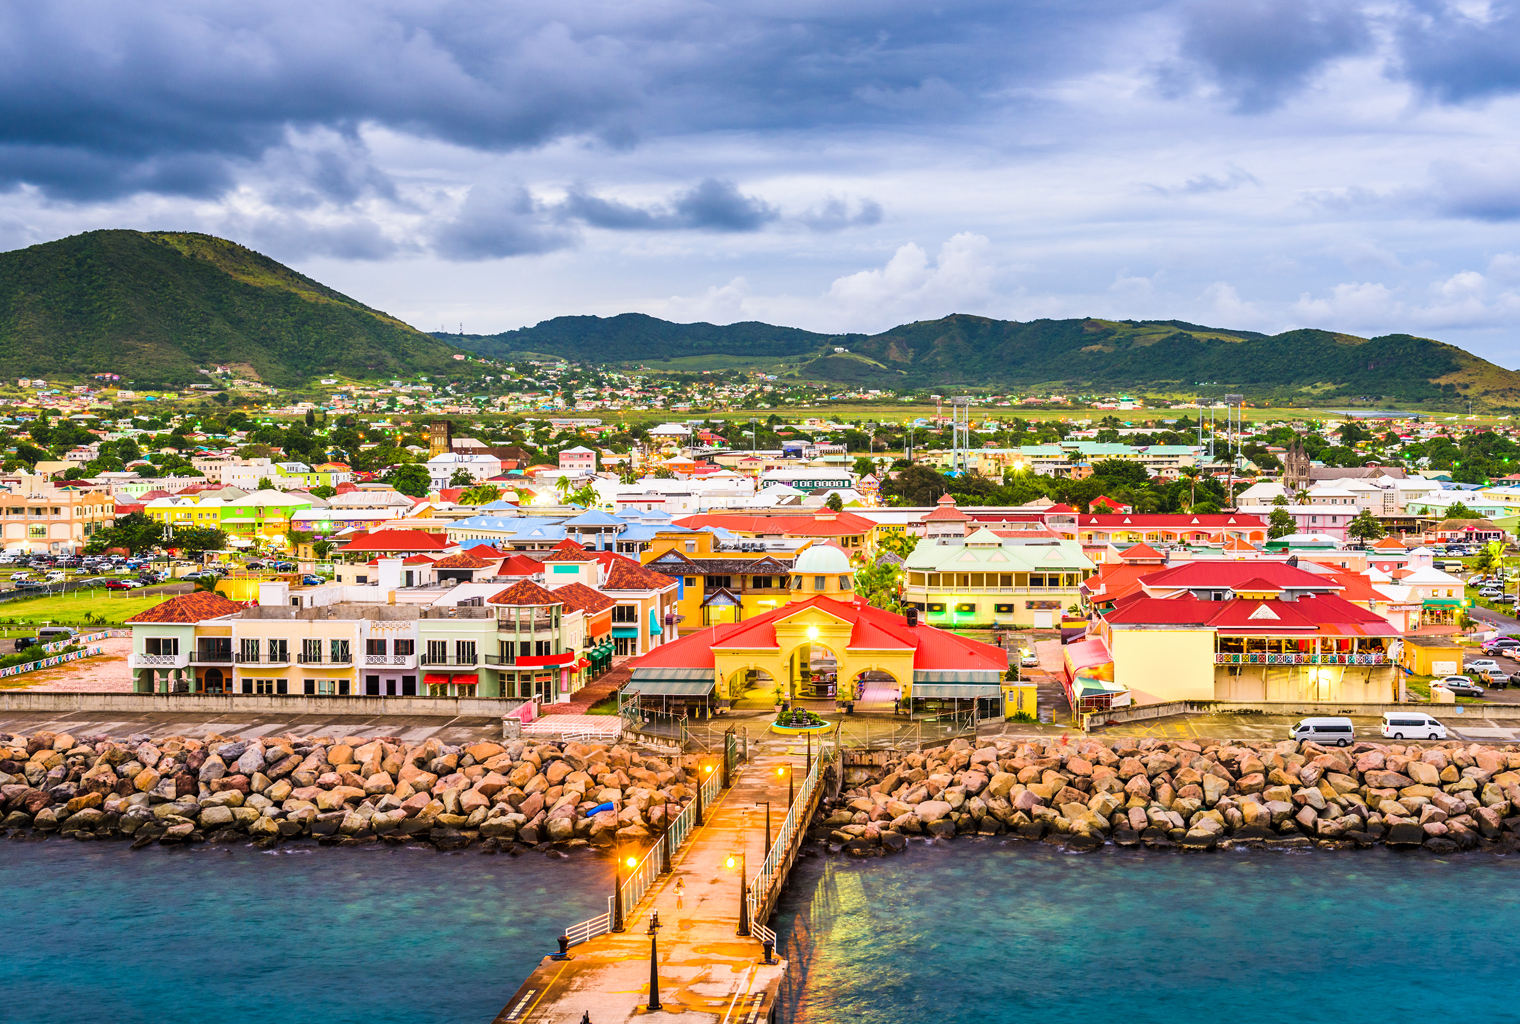 Tax Friendly Saint Kitts and Nevis Approves Progressive Crypto Bill, Lenient Capital Gains Exemption